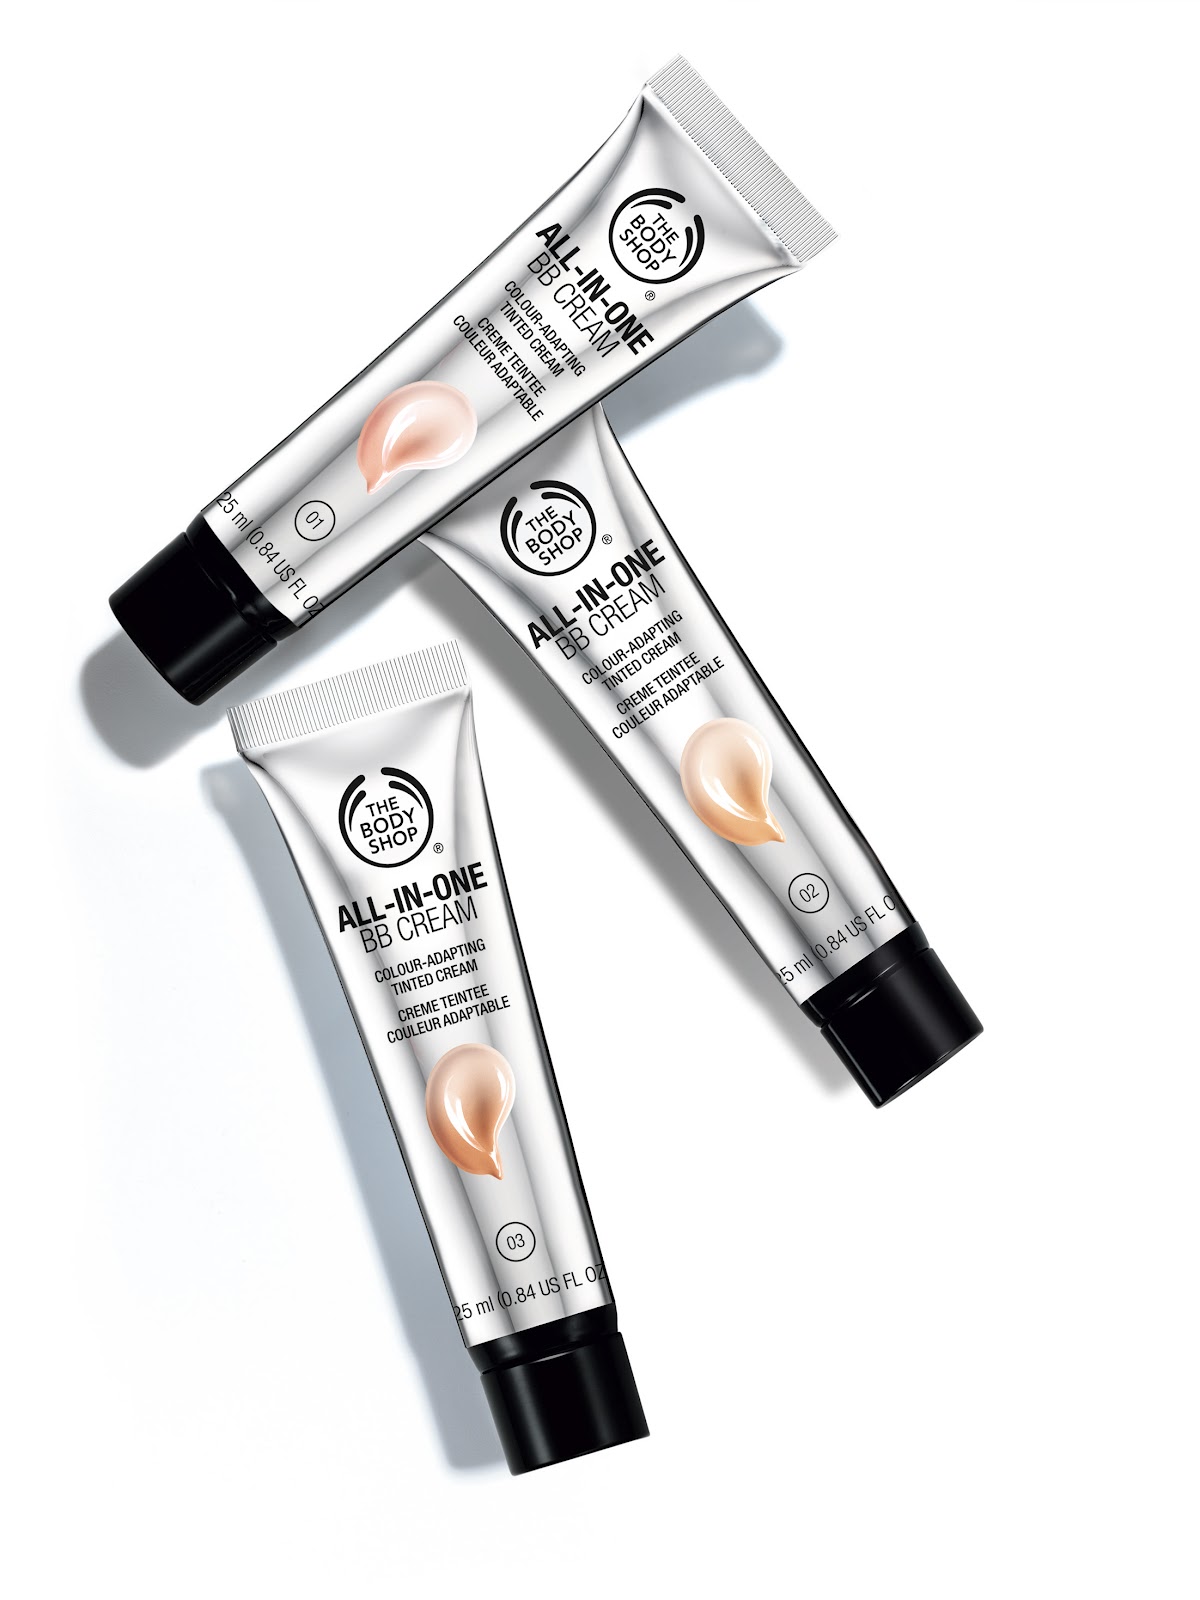 Ciro trompet Geestig The Body Shop All-In-One BB Cream / Collection | The Sunday Girl